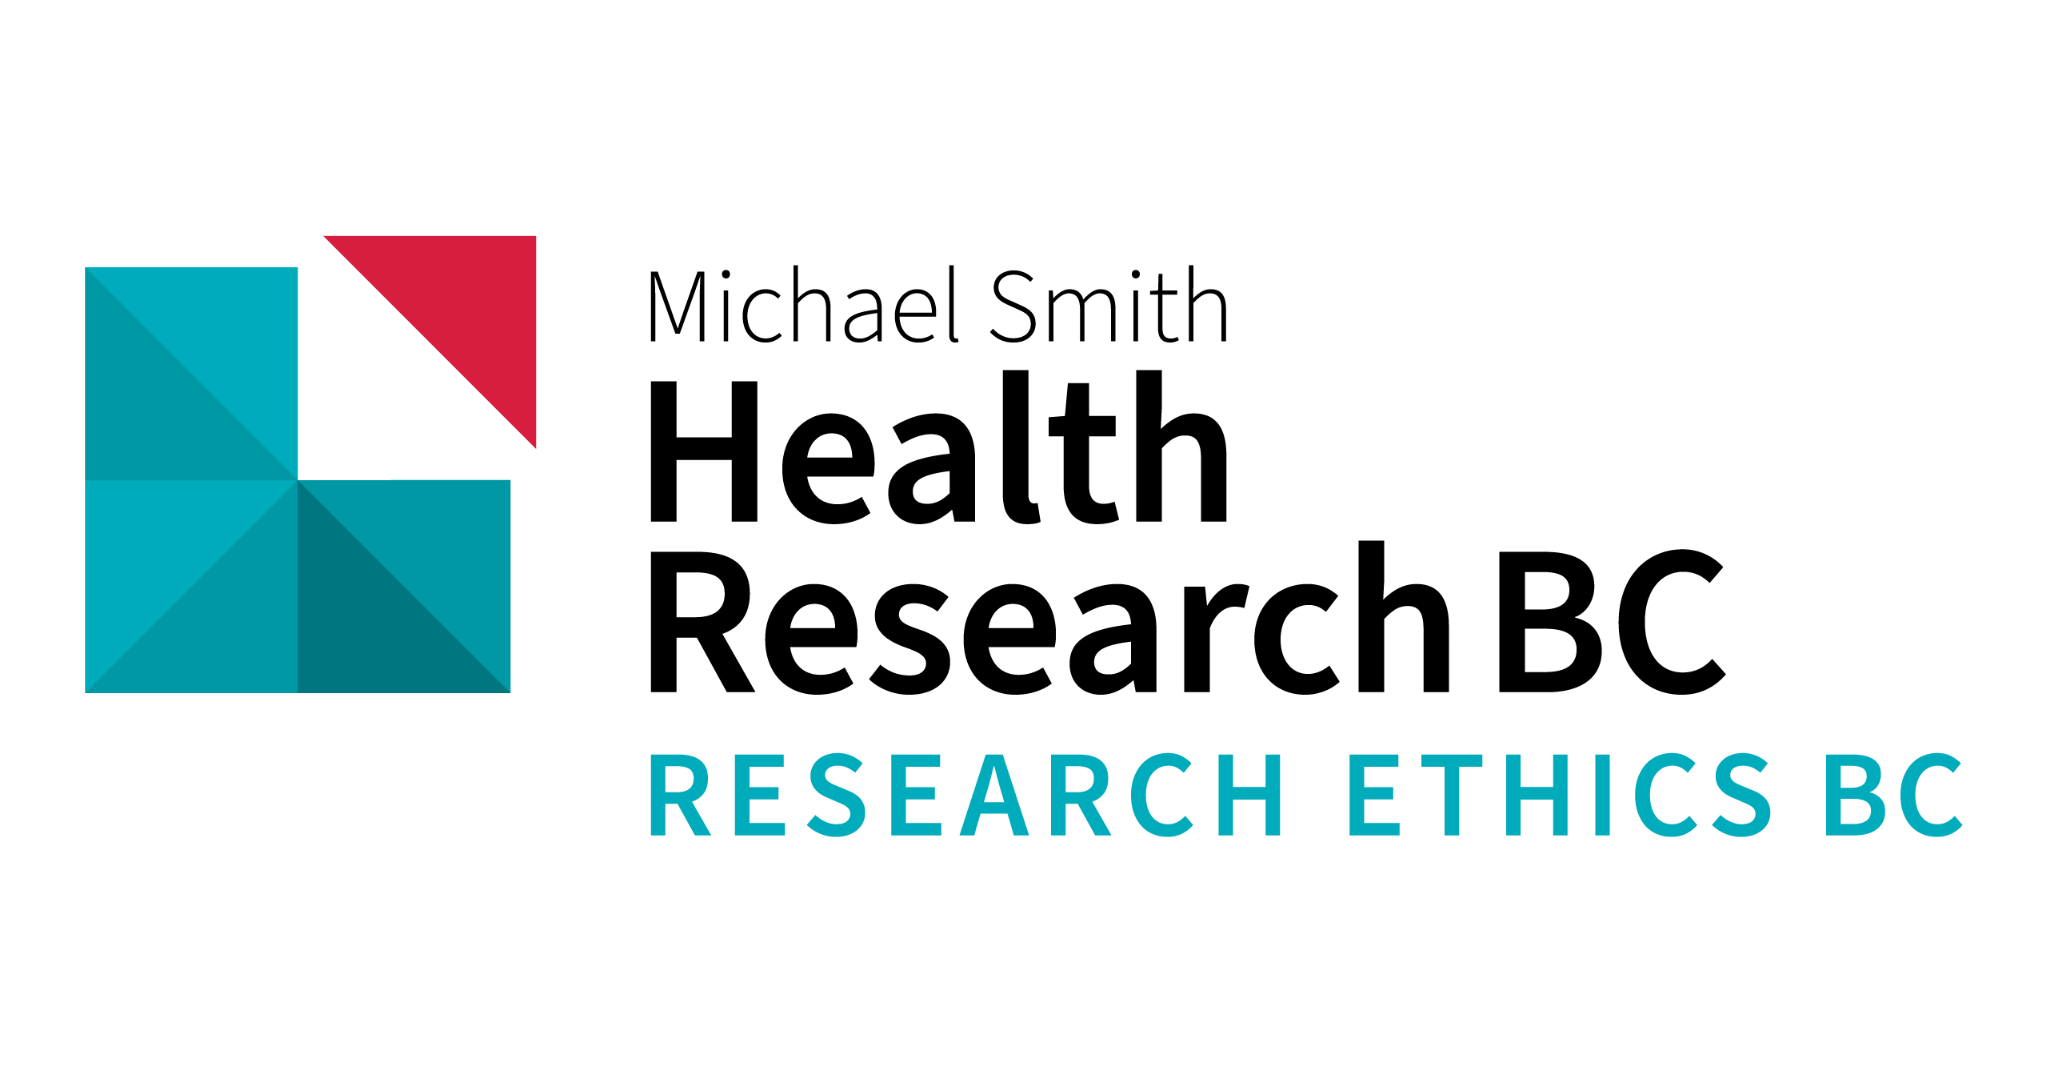 Research Ethics BC's logo